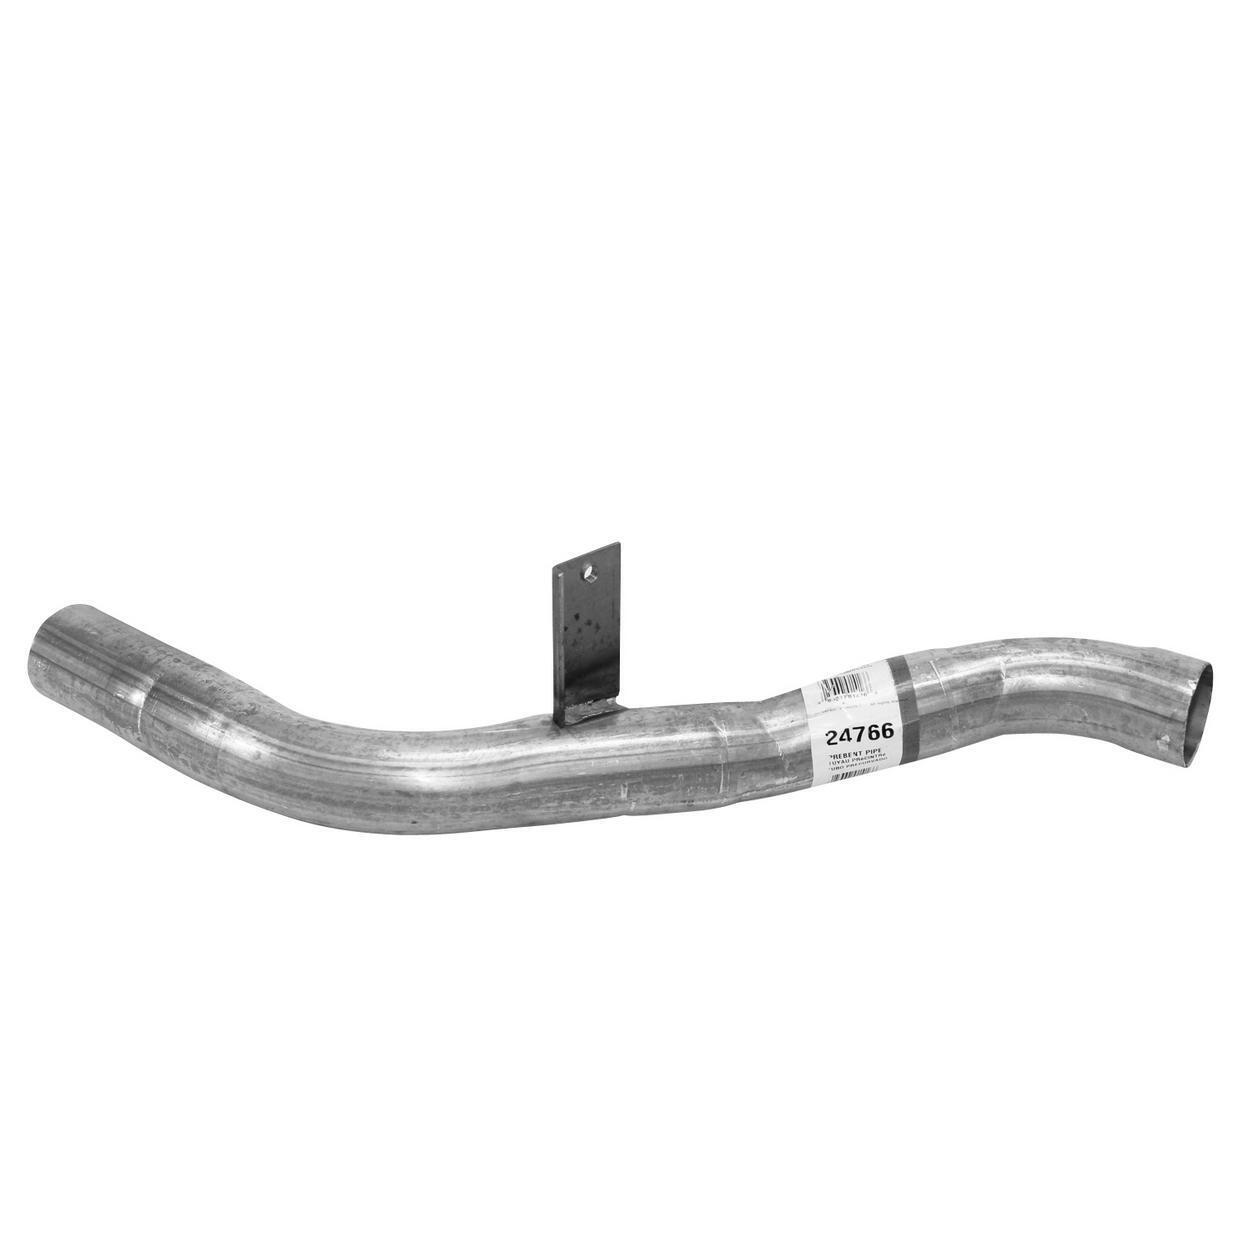 Exhaust Tail Pipe for 1986 Chevrolet Celebrity 2.8L V6 GAS OHV